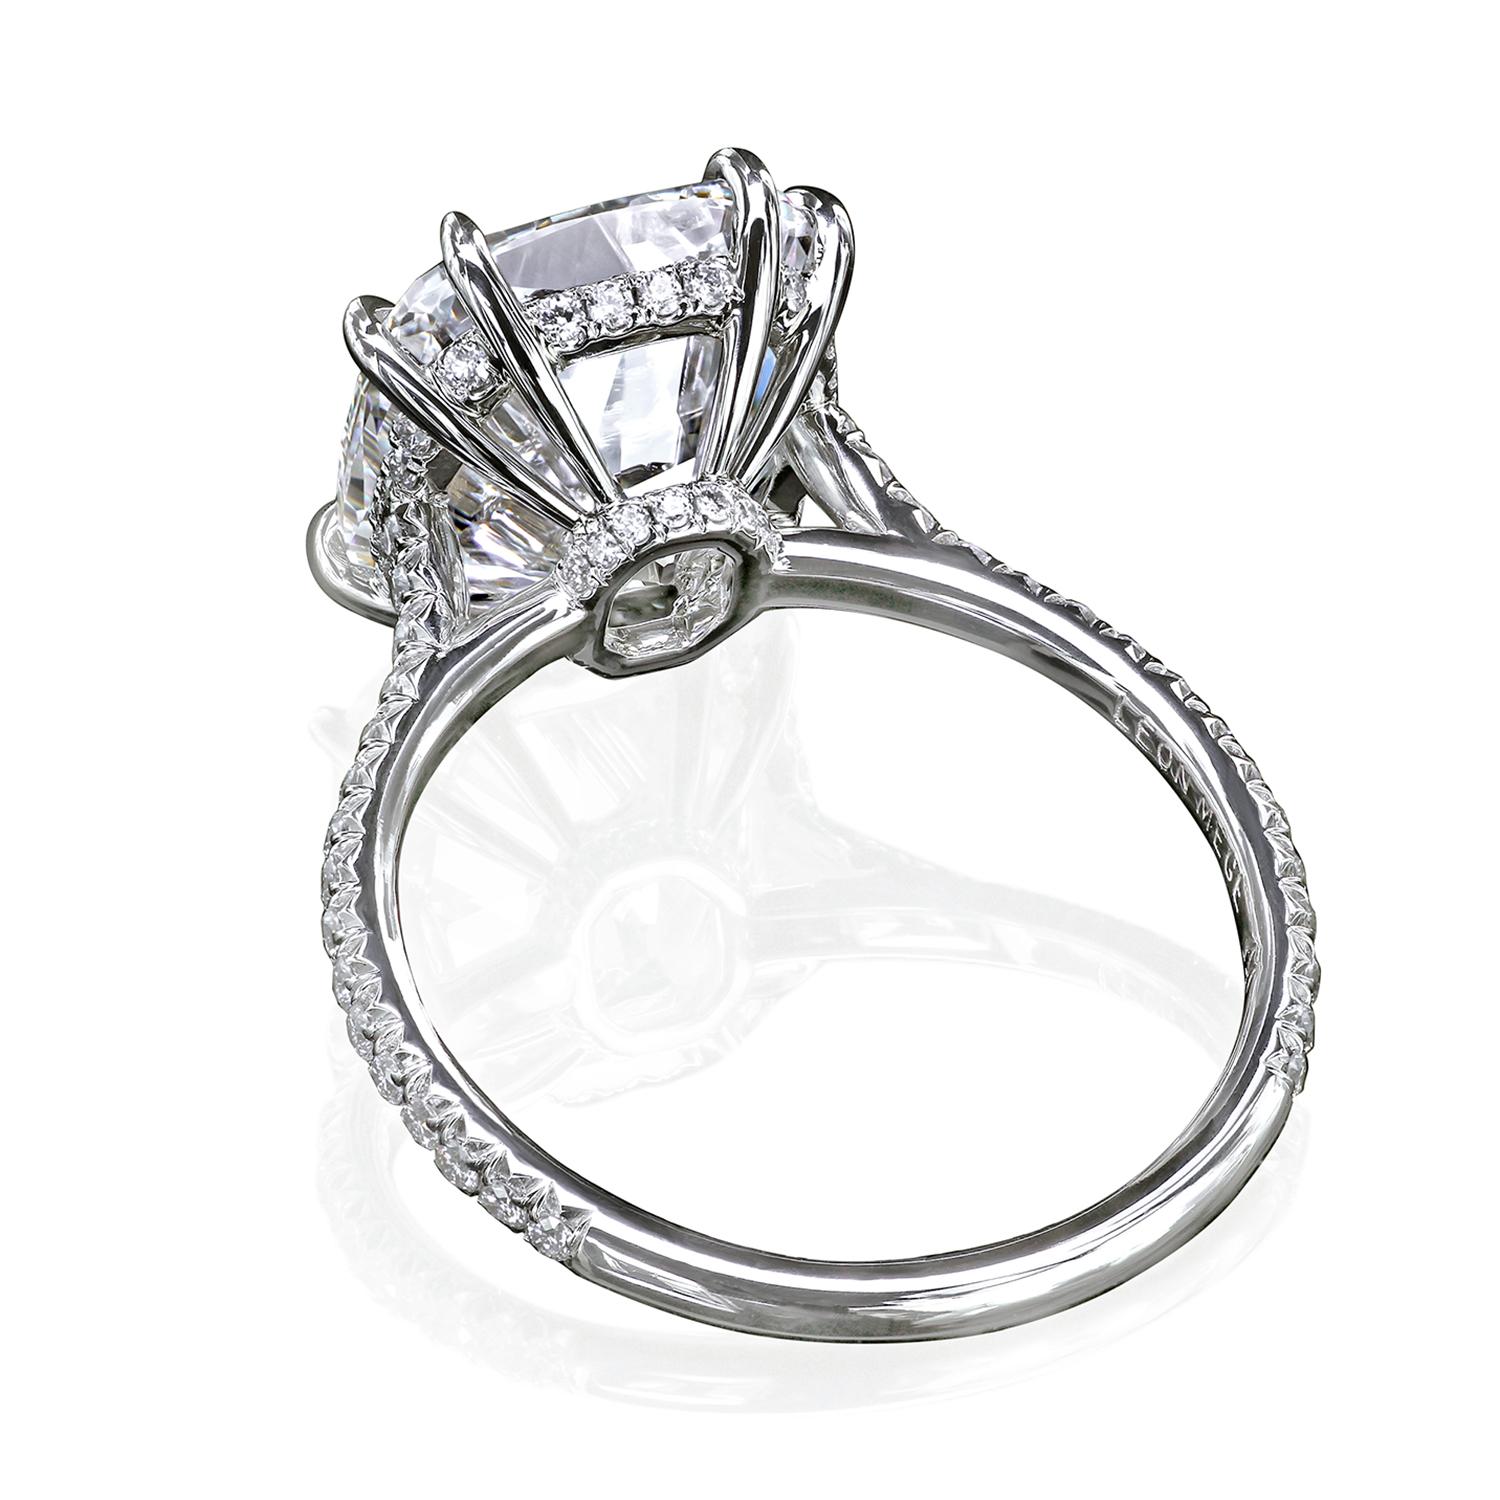 Solitaire engagement ring featuring a True Antique cushion cut diamond at the center.
The timeless design is completed with micro pave diamonds on the basket holding the diamond and cathedral shank.
Hand-forged platinum
The ring has not been made